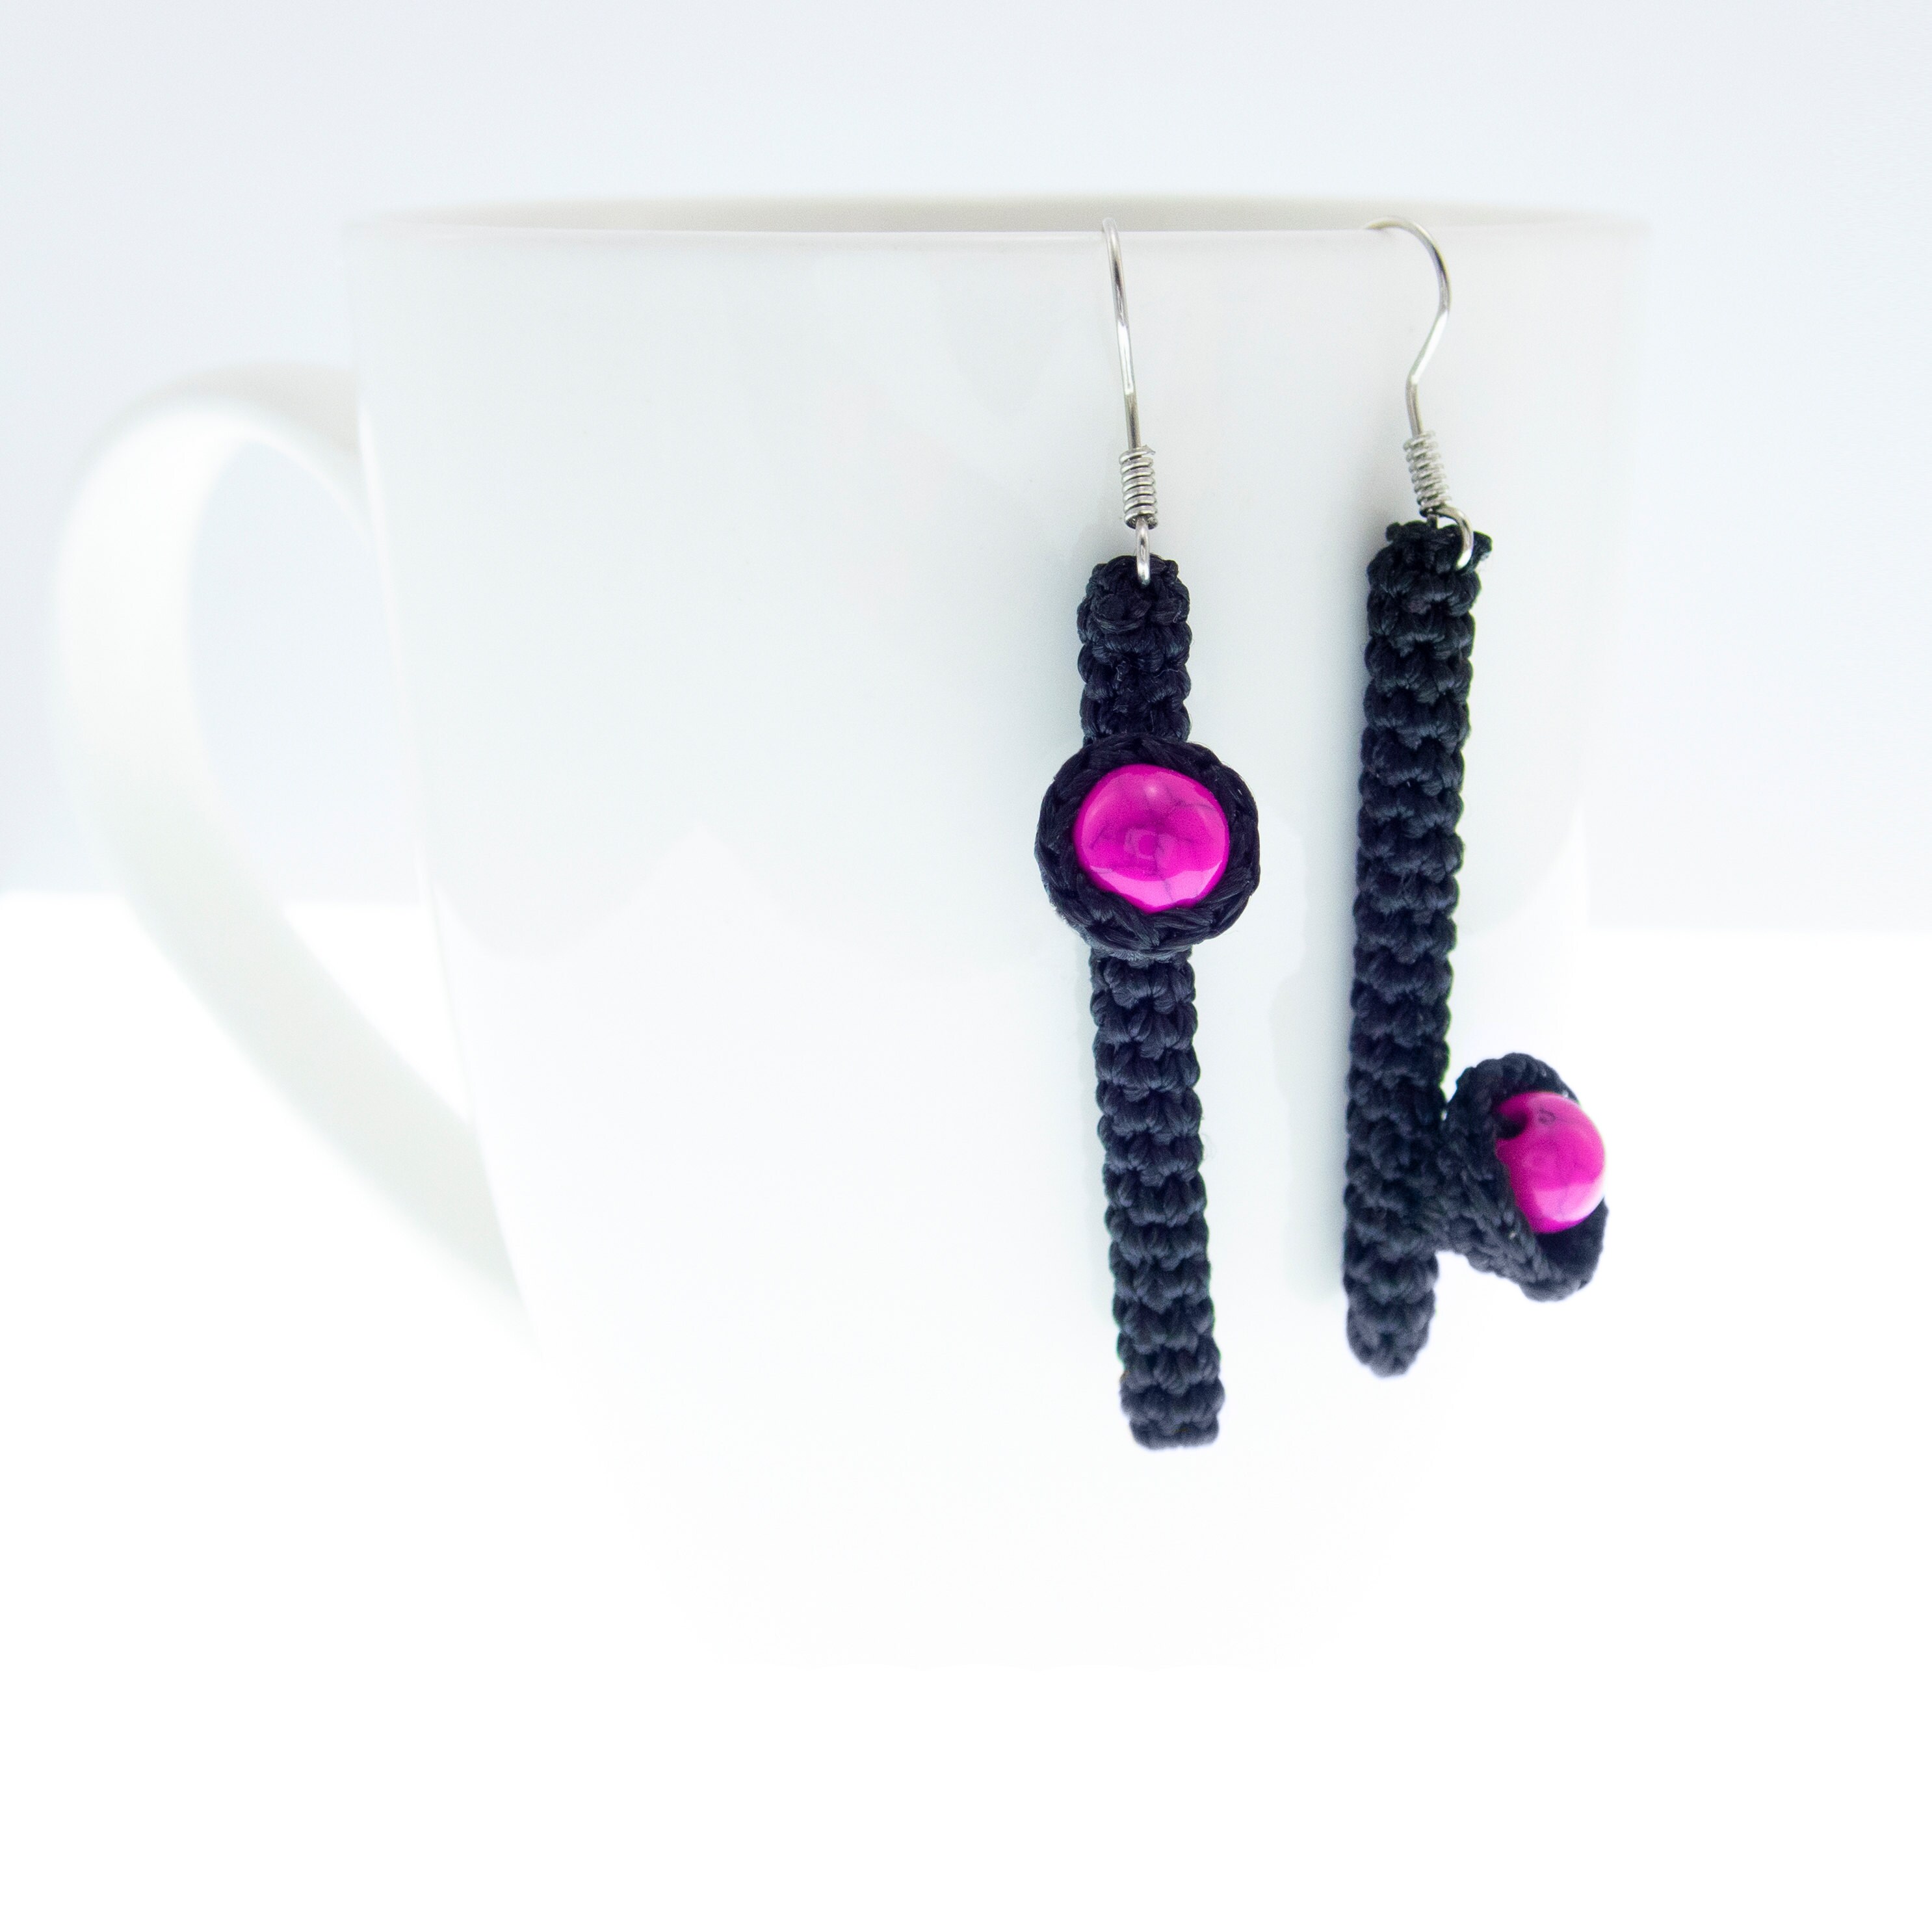 handmade mismatched earrings dangle in black and pink